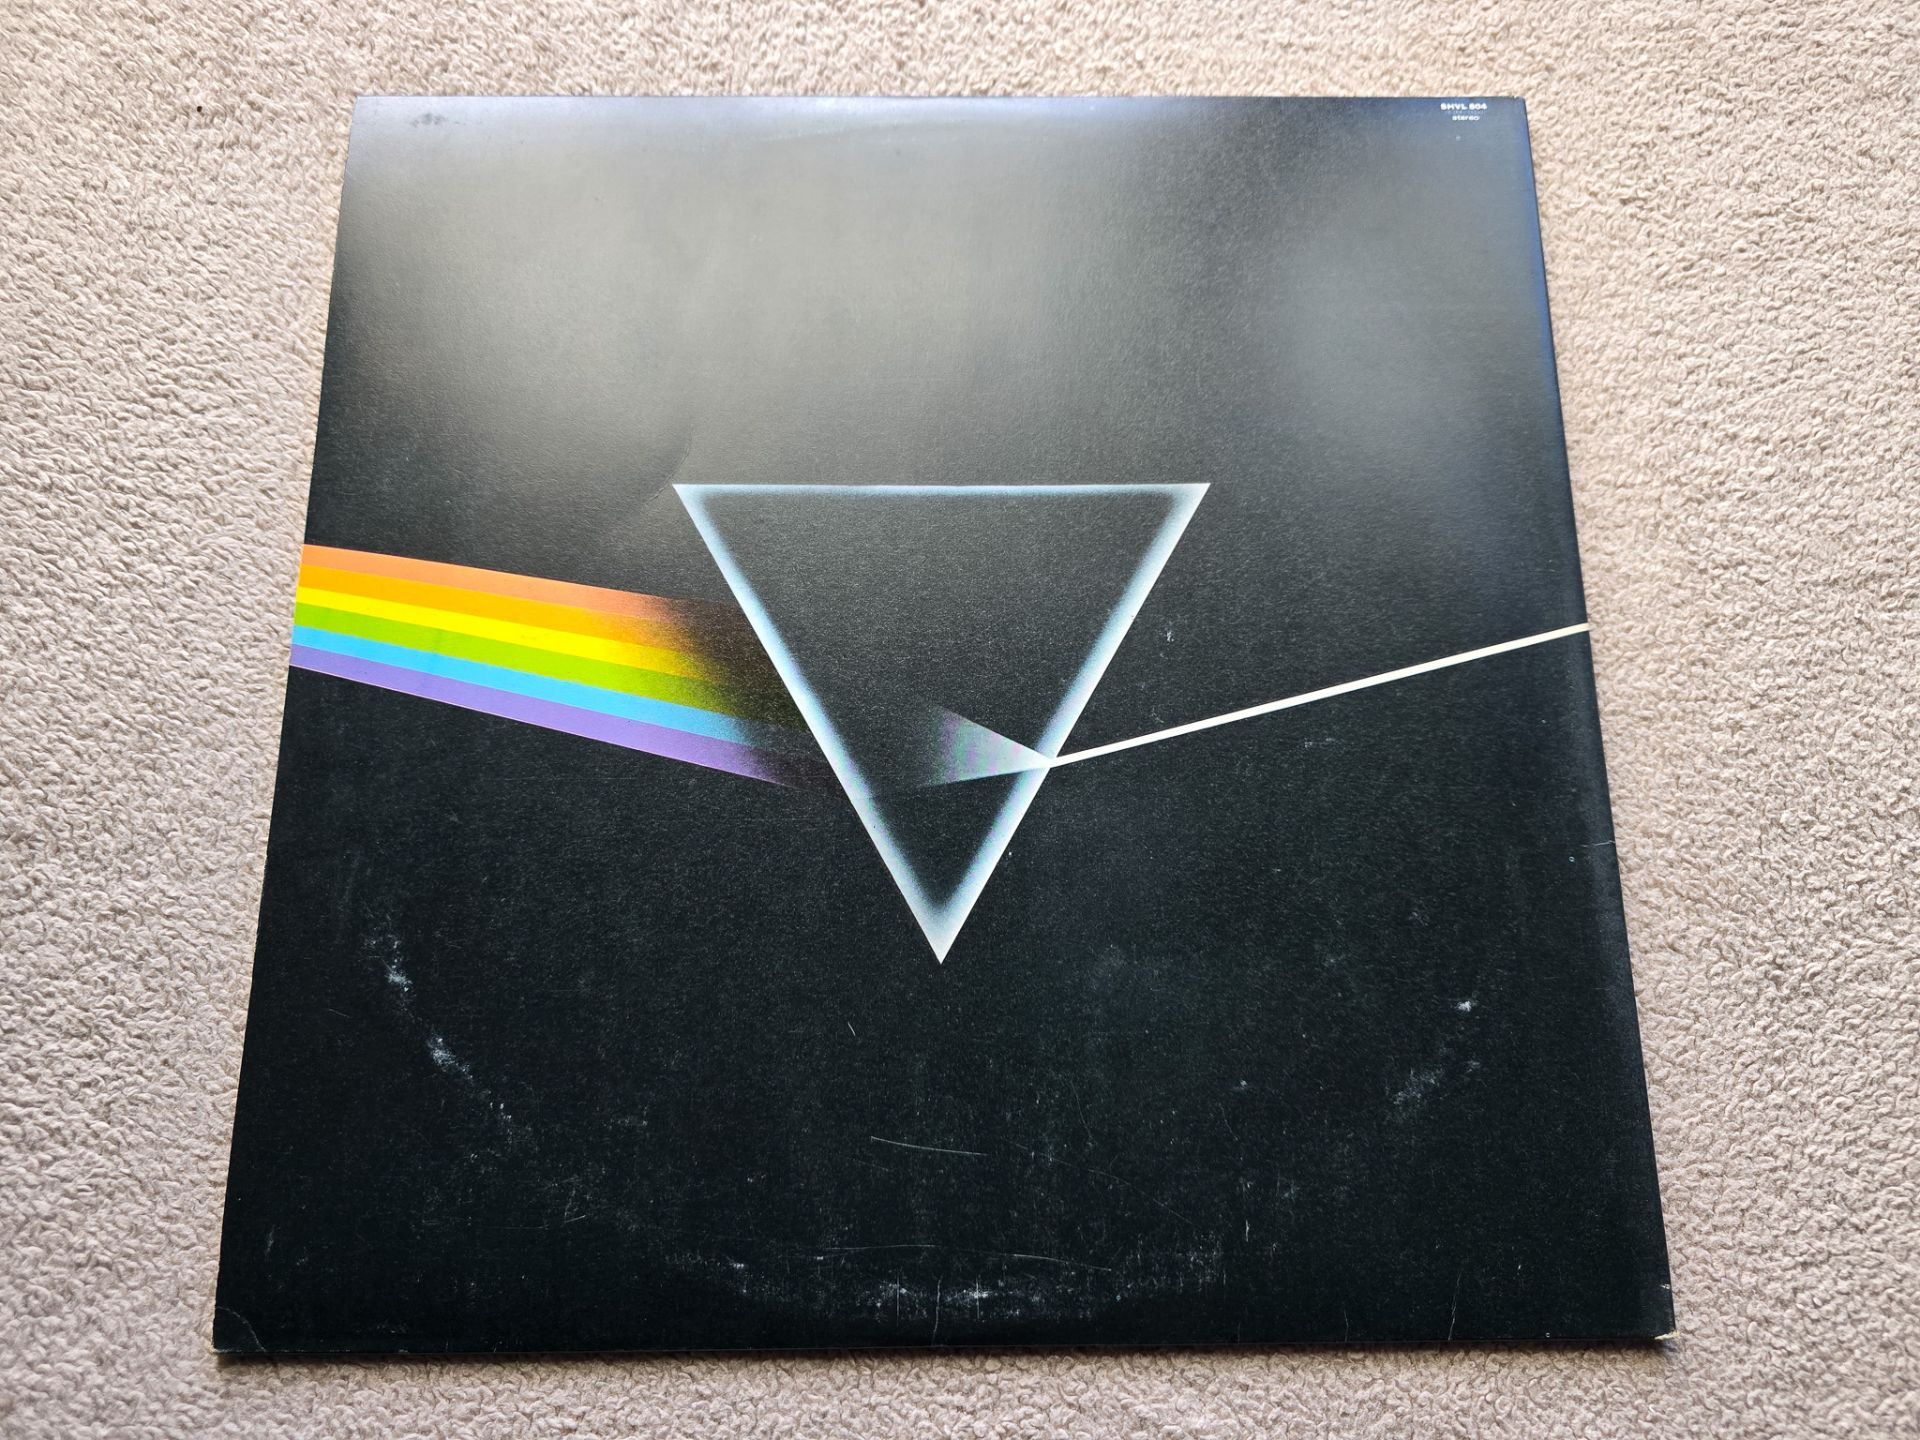 Pink Floyd – The Dark Side Of The Moon early UK Vinyl LP + 2 Posters & Sticker - Image 3 of 11